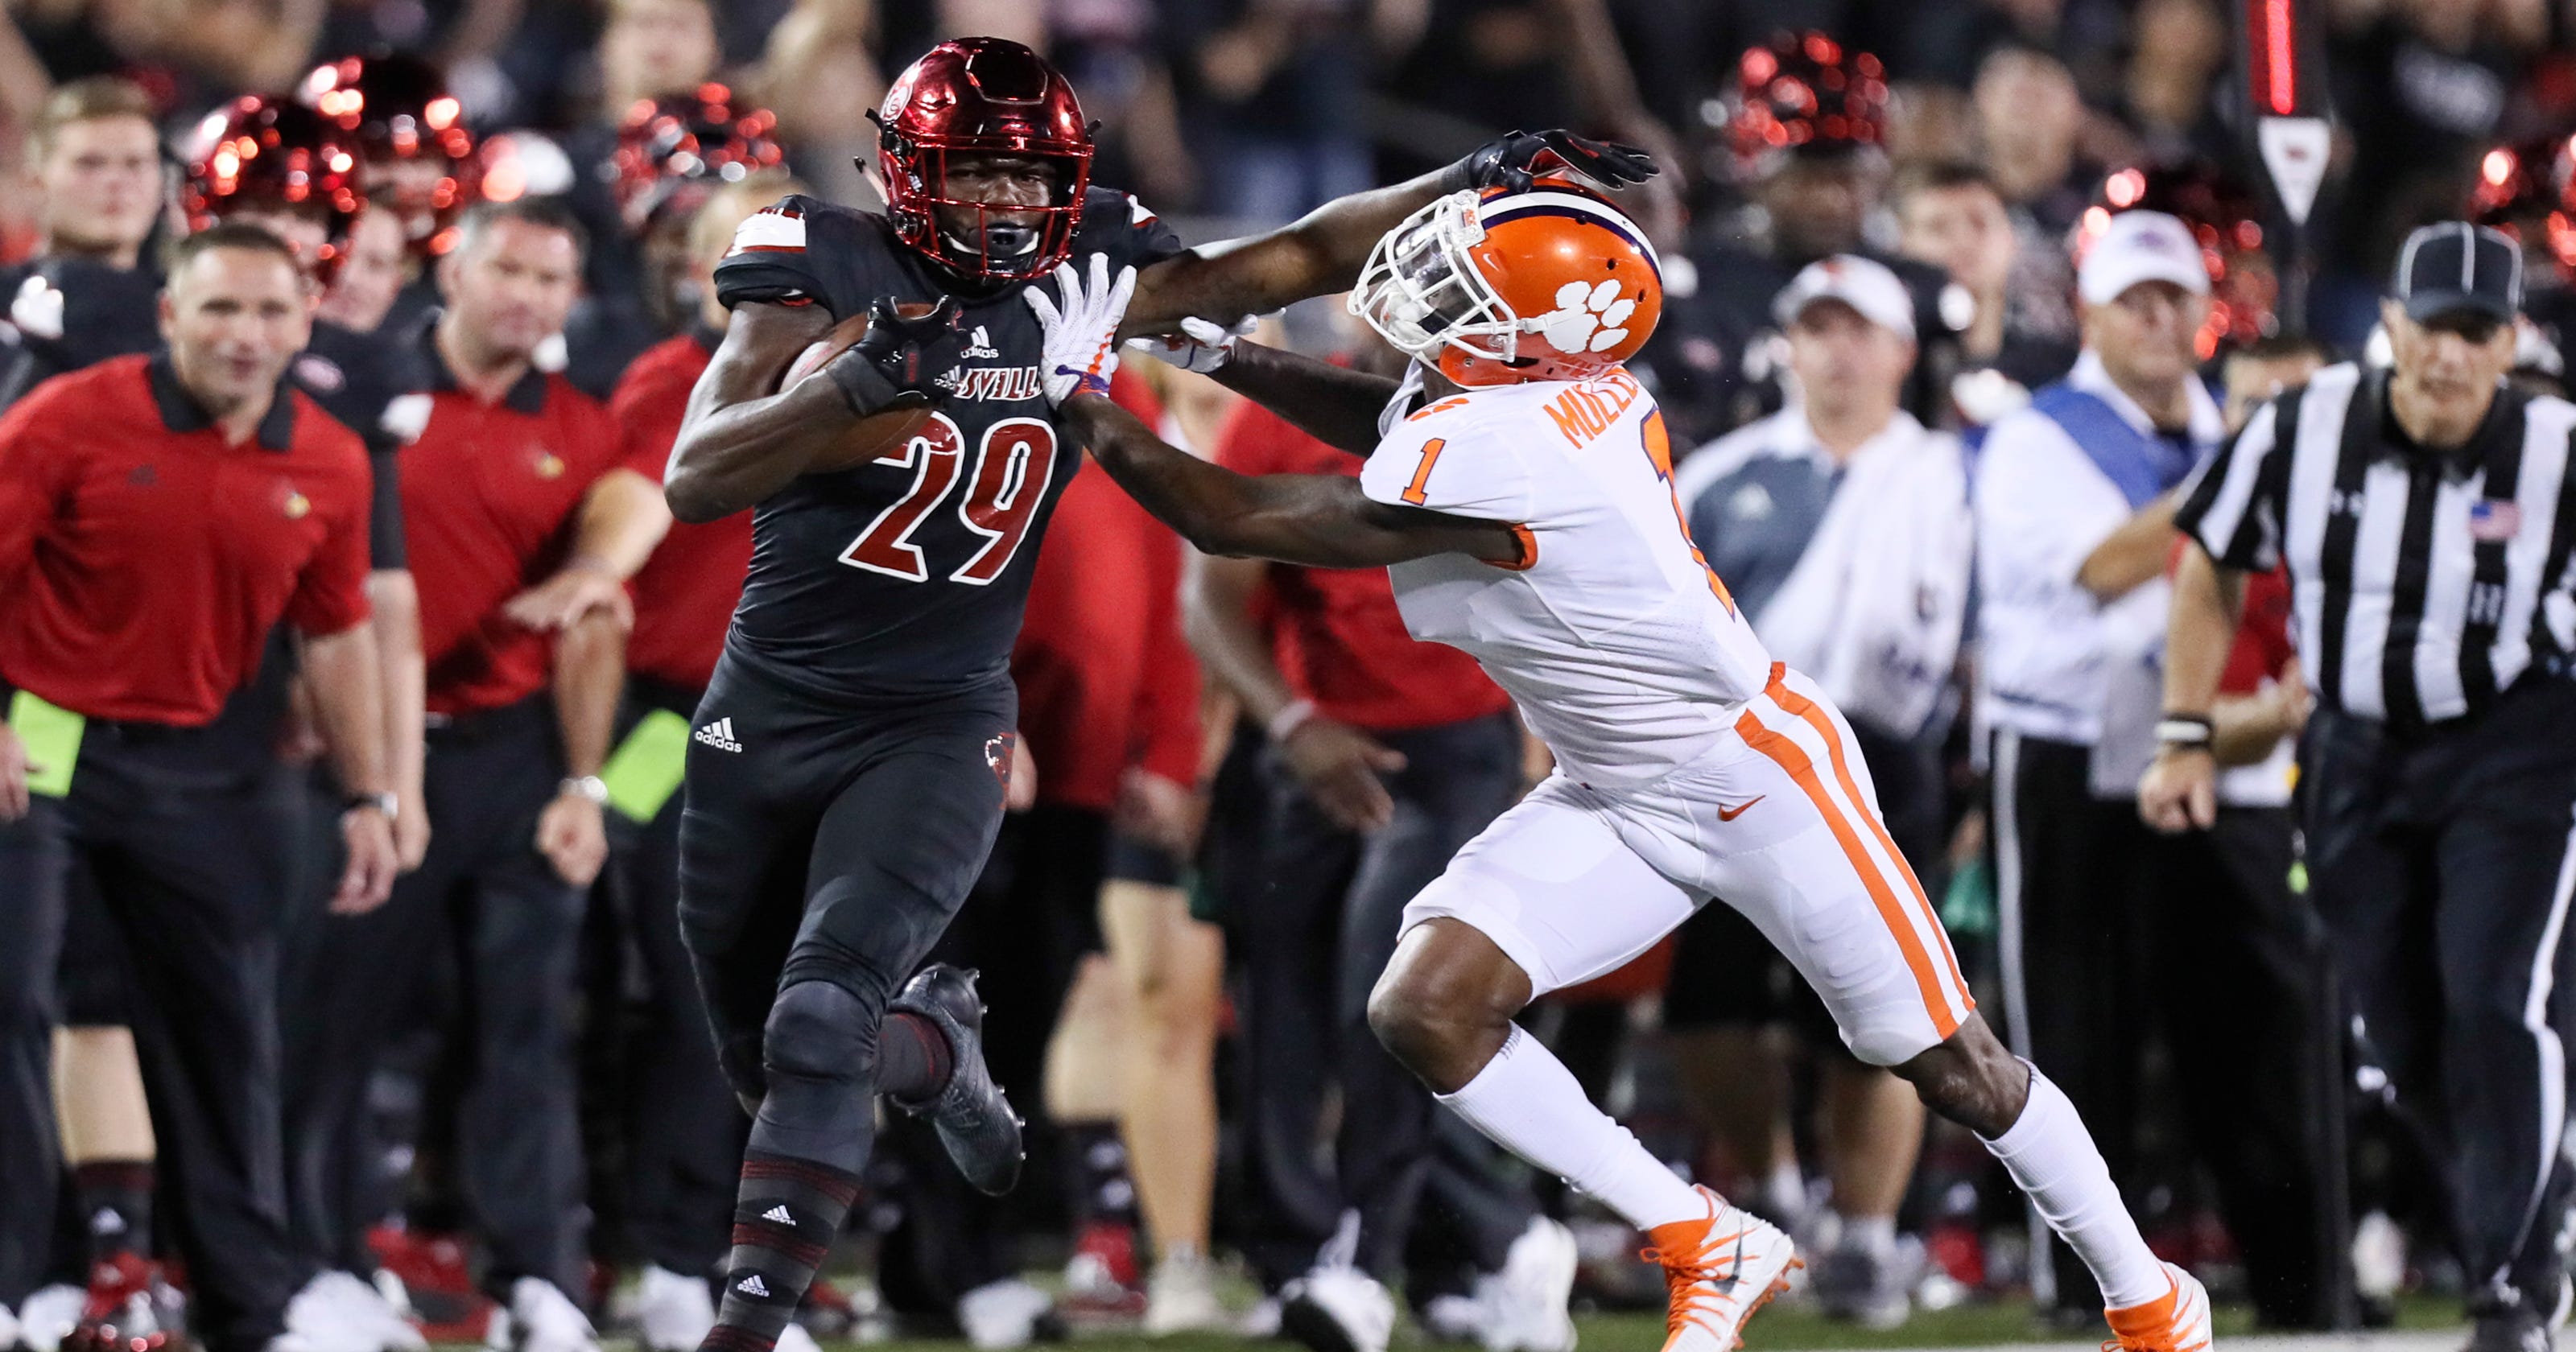 Louisville football schedule: The 5 best games of the season